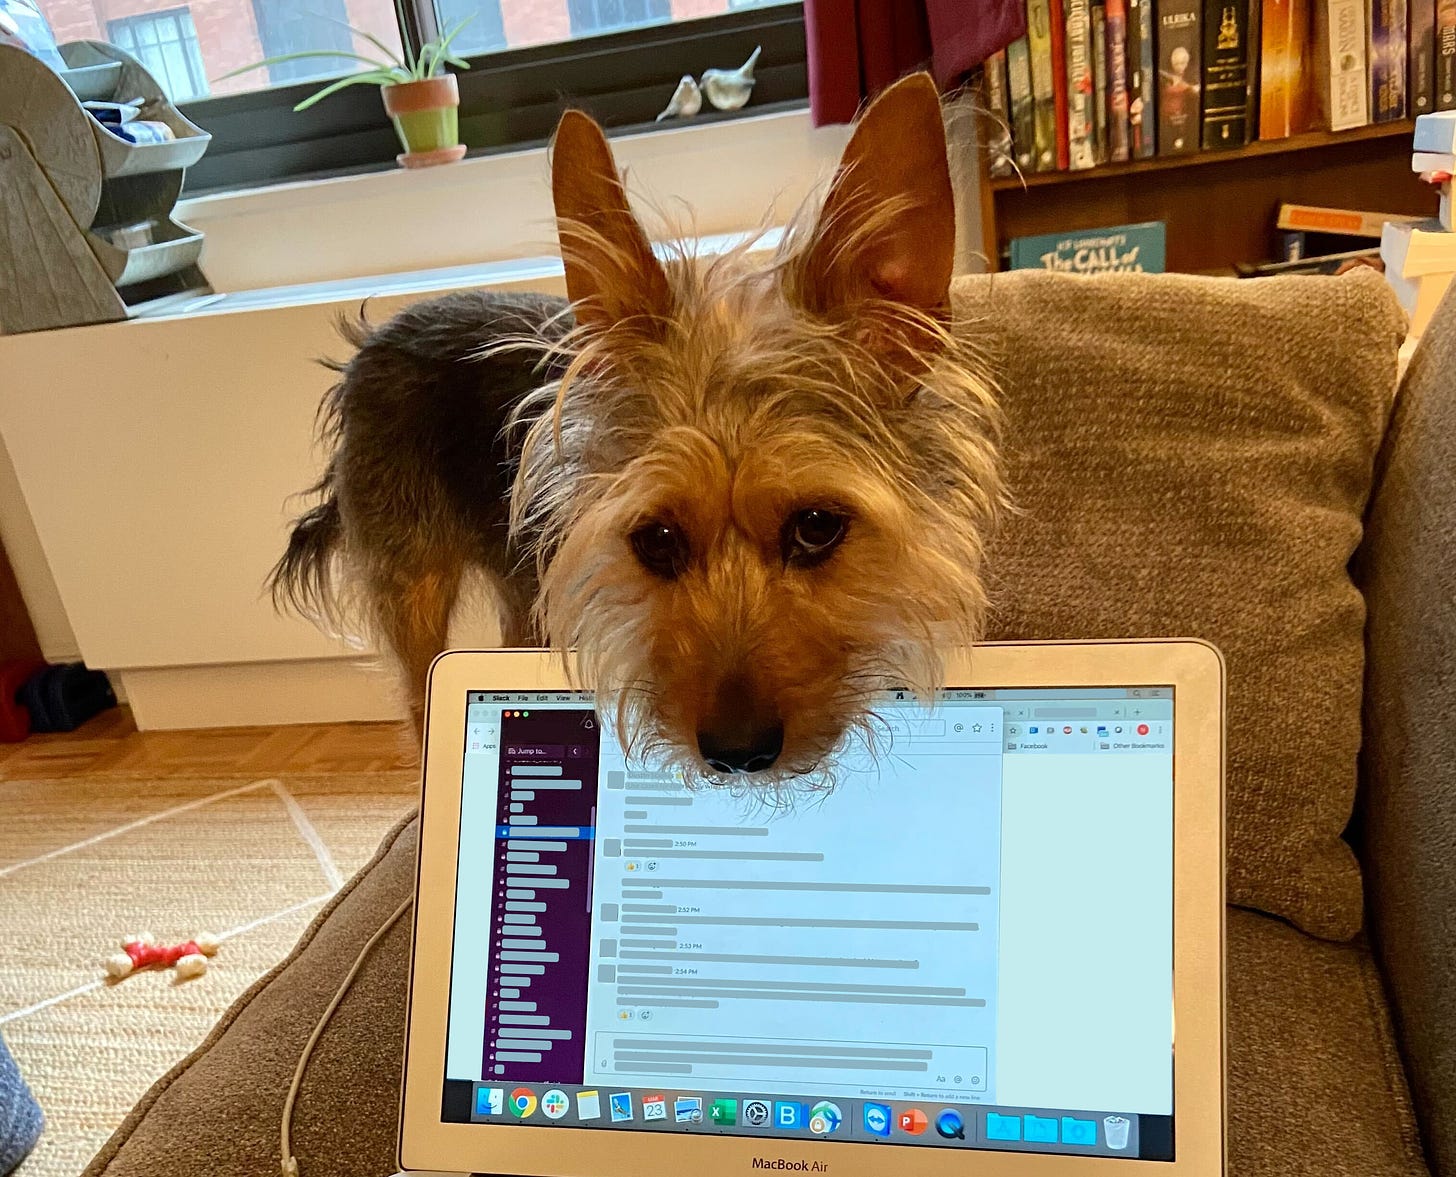 A scruffy tan and black terrier stands behind a laptop with her face hovering in front of it as she glares at the camera